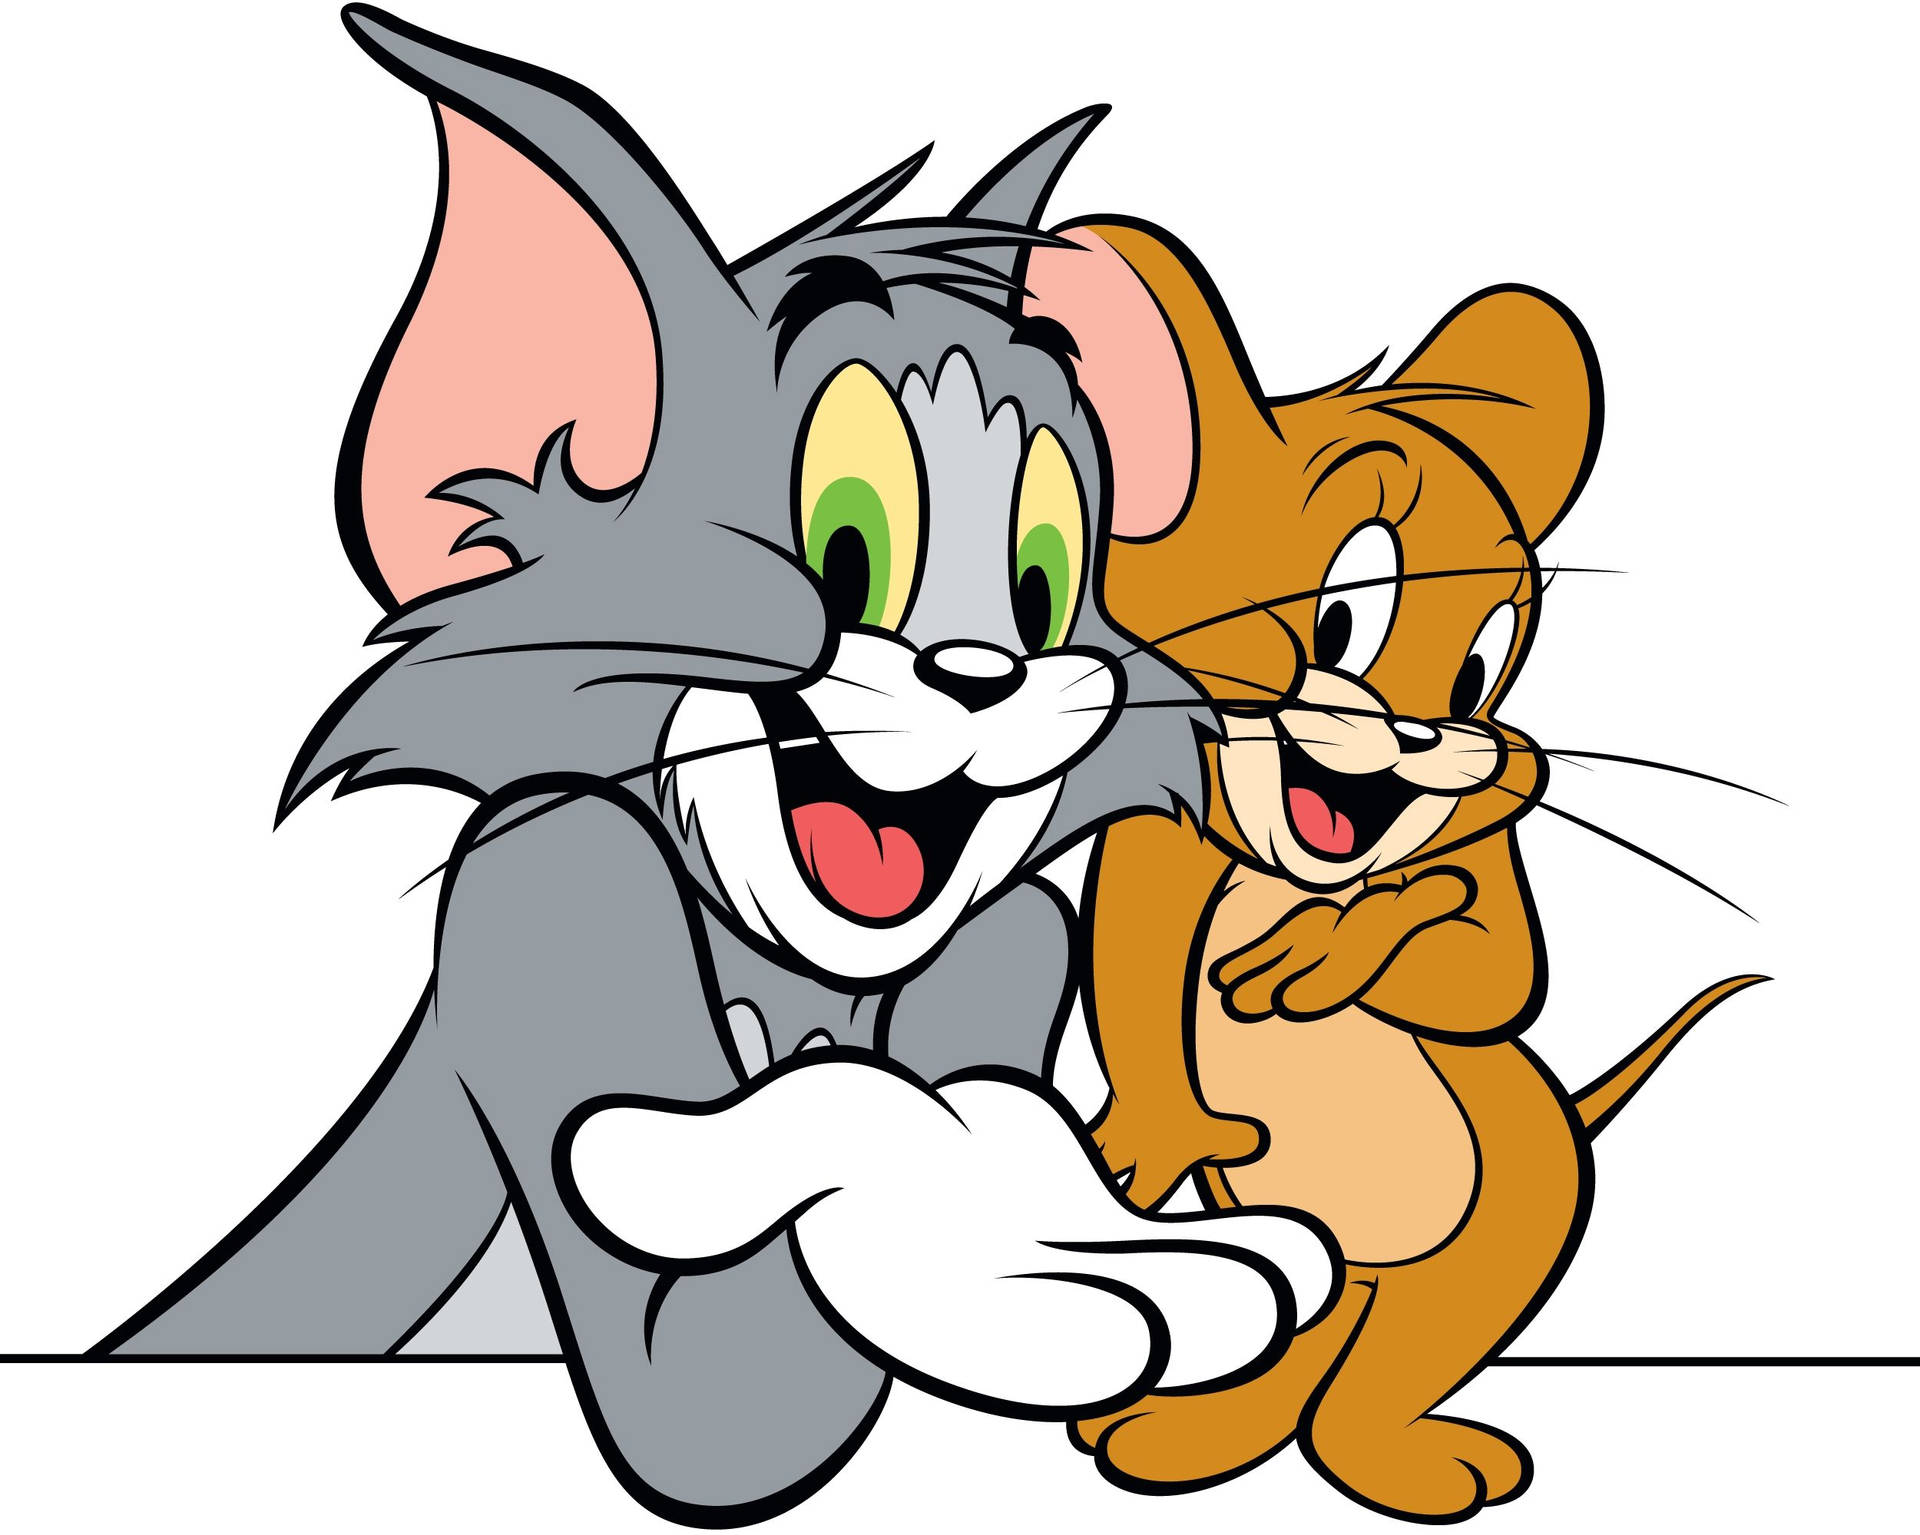 Free Tom And Jerry Wallpaper Downloads, [200+] Tom And Jerry Wallpapers for  FREE 